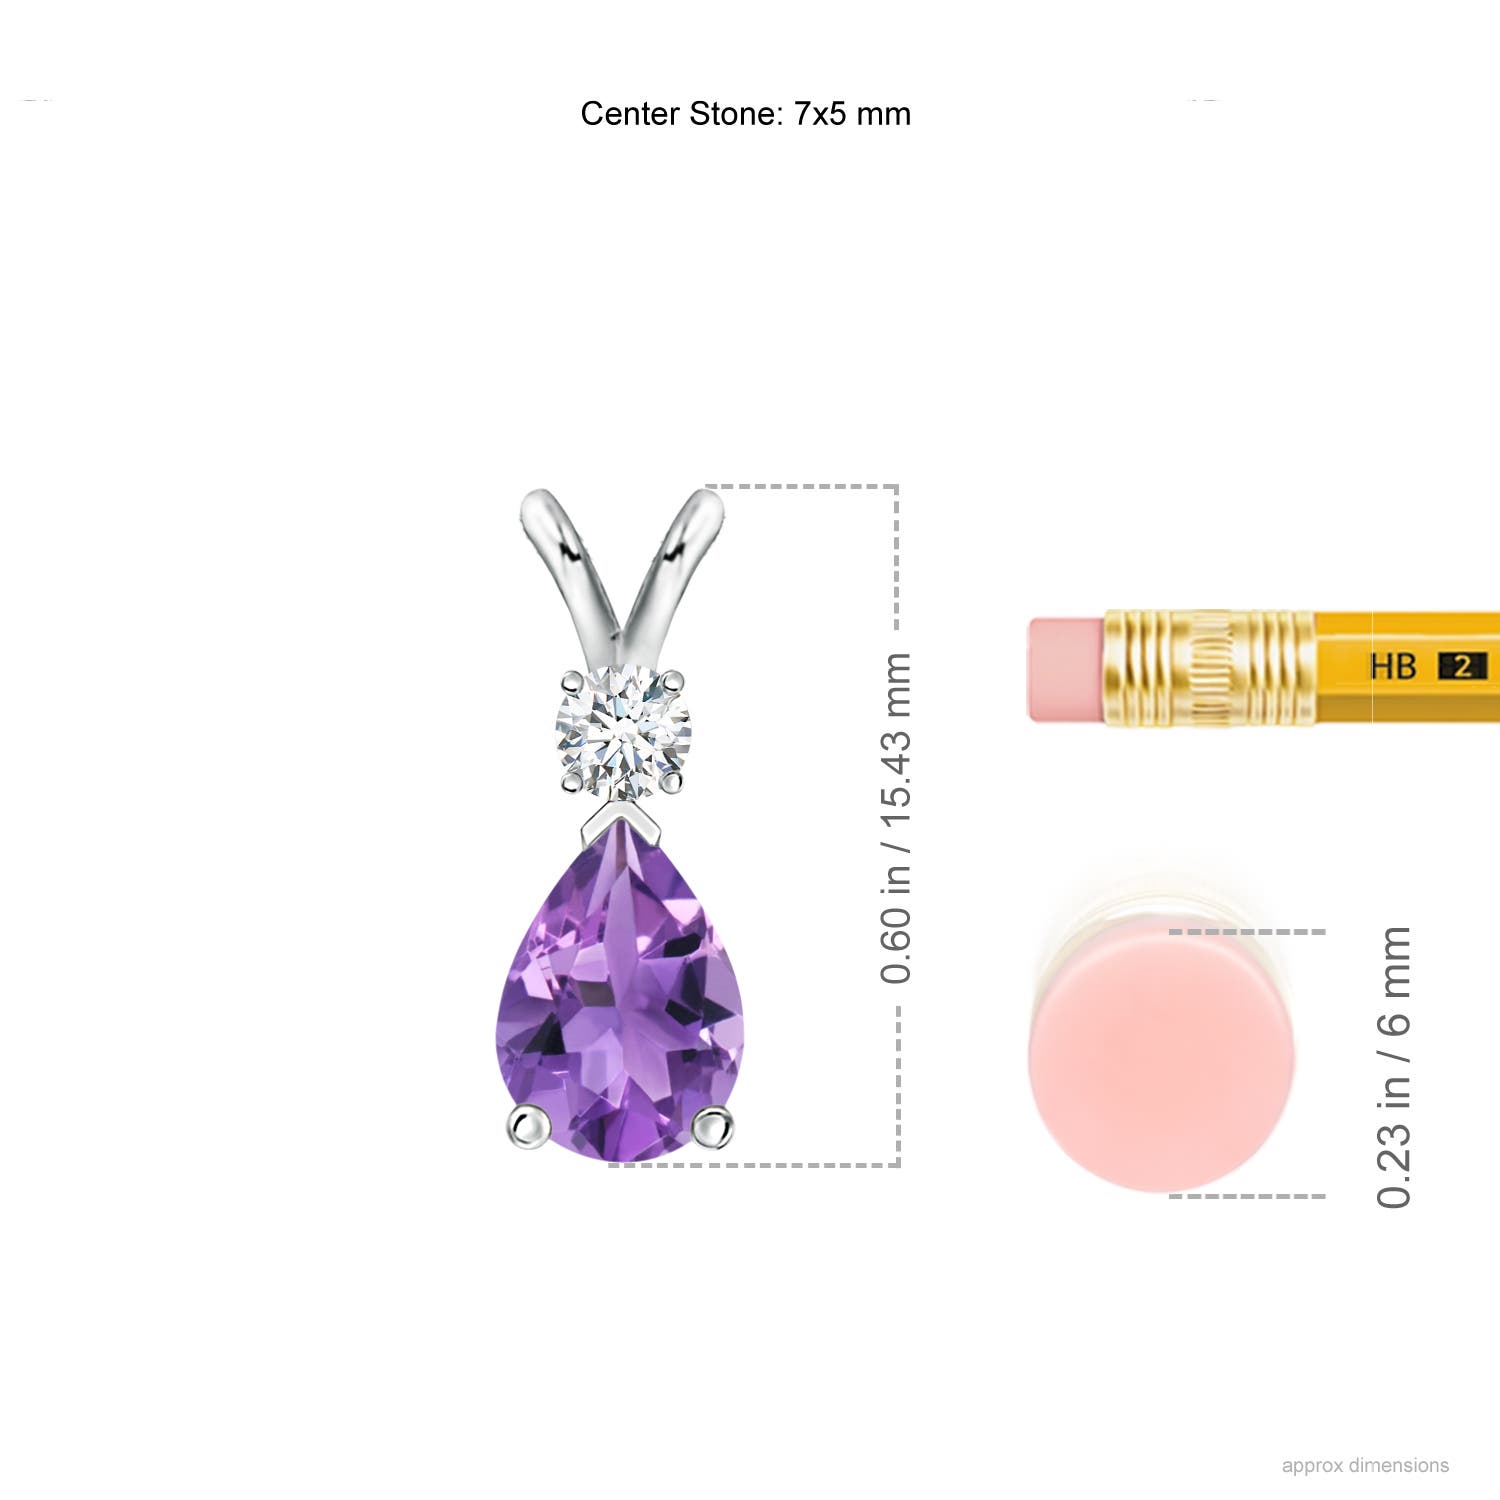 AA - Amethyst / 0.67 CT / 14 KT White Gold